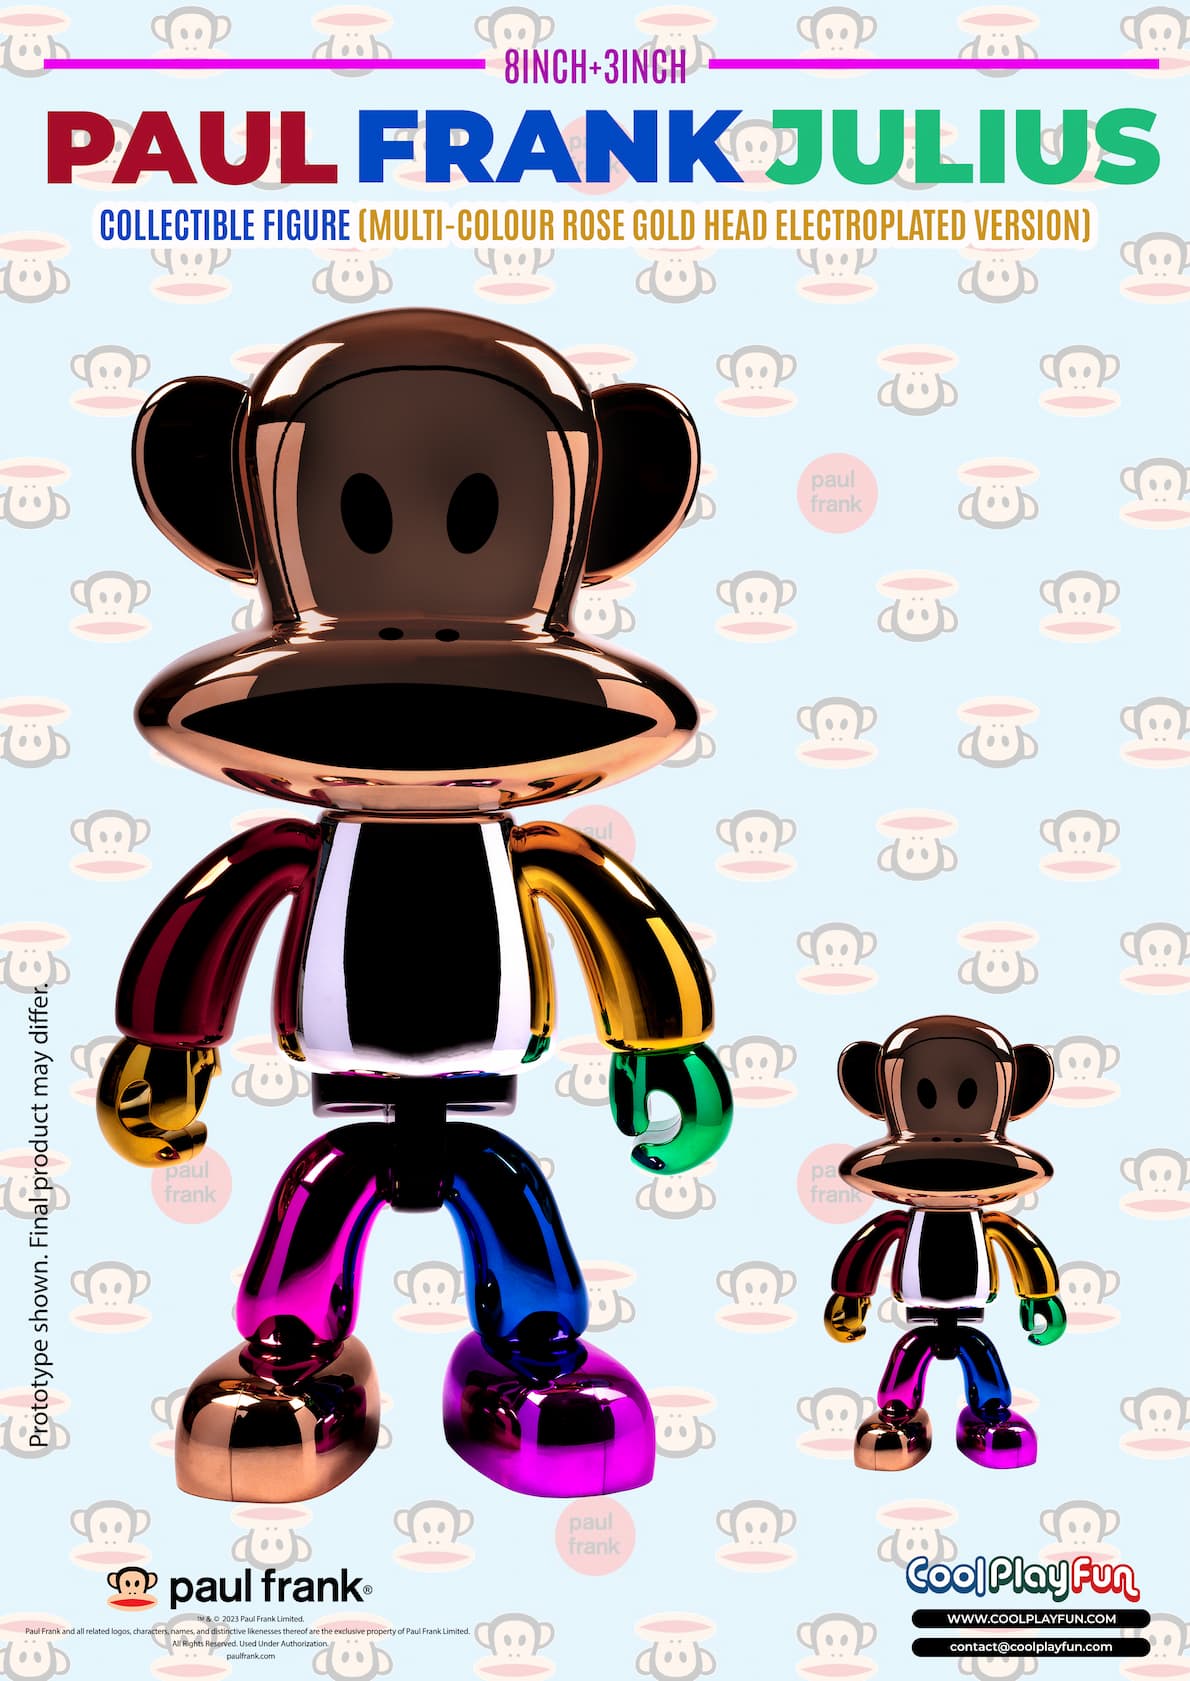 8inch_3inch Paul Frank Julius Collectible Figure (Multi-colour Rose Gold Head Electroplated Version) Marketing Image